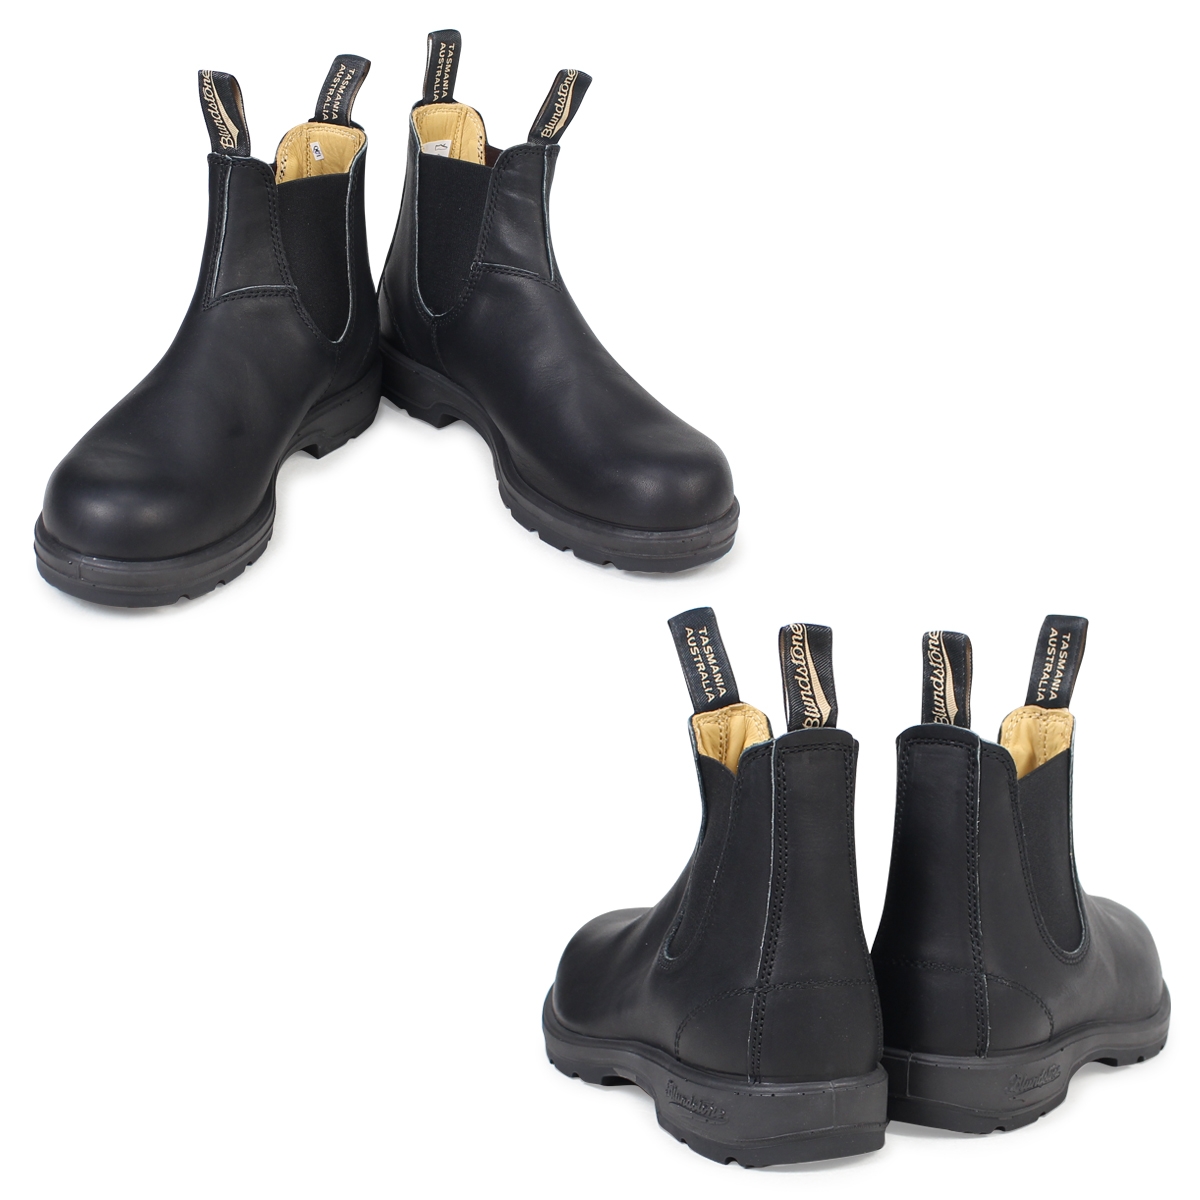 blundstone 558 boots